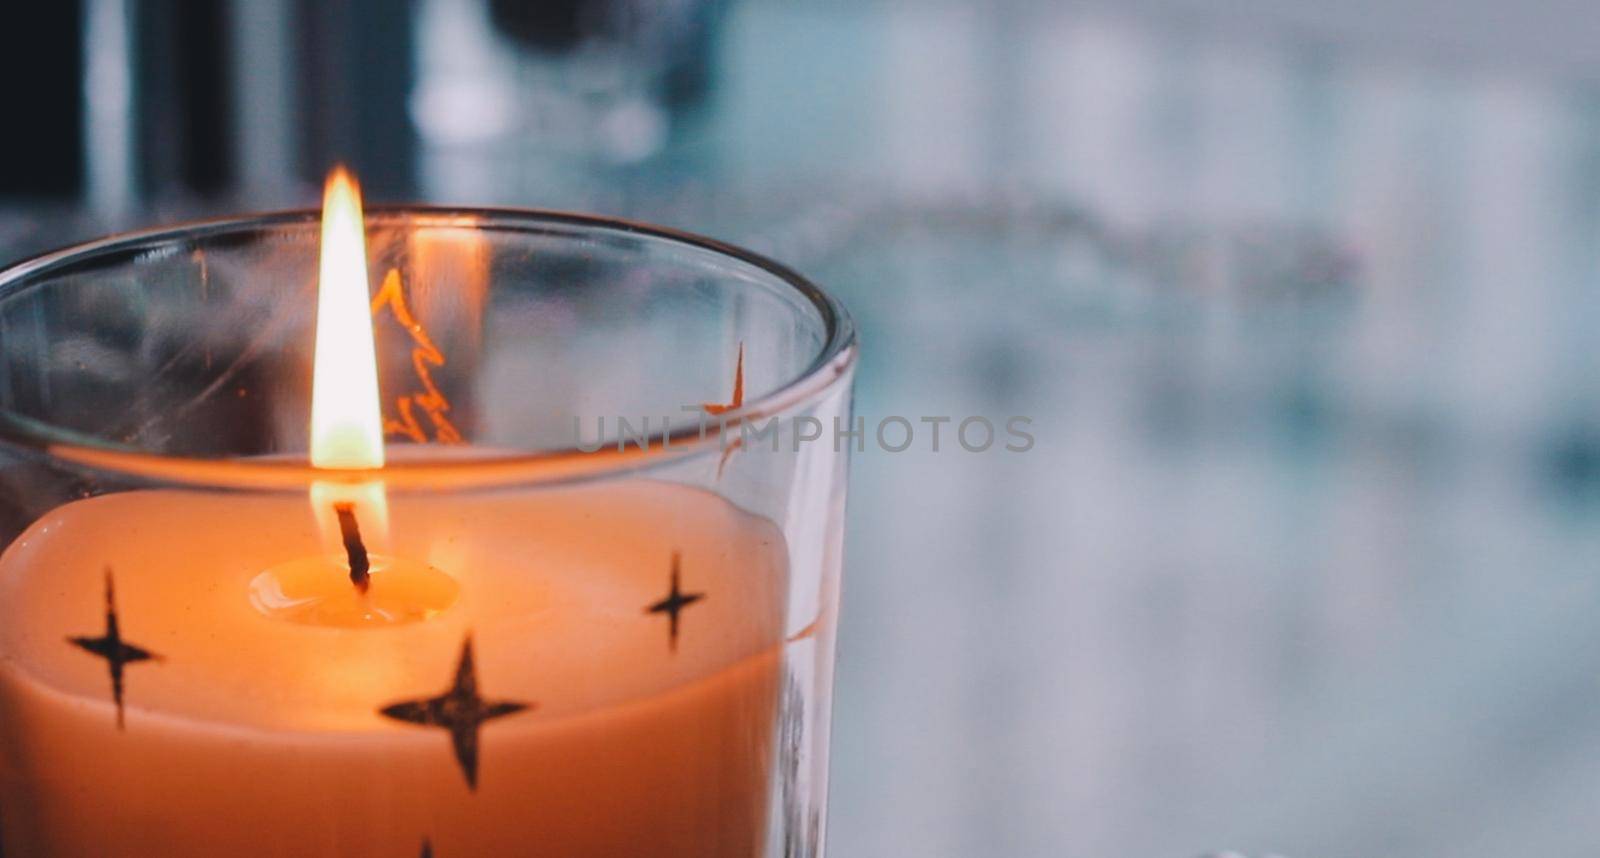 Beautiful holiday candle lights, romantic home decoration